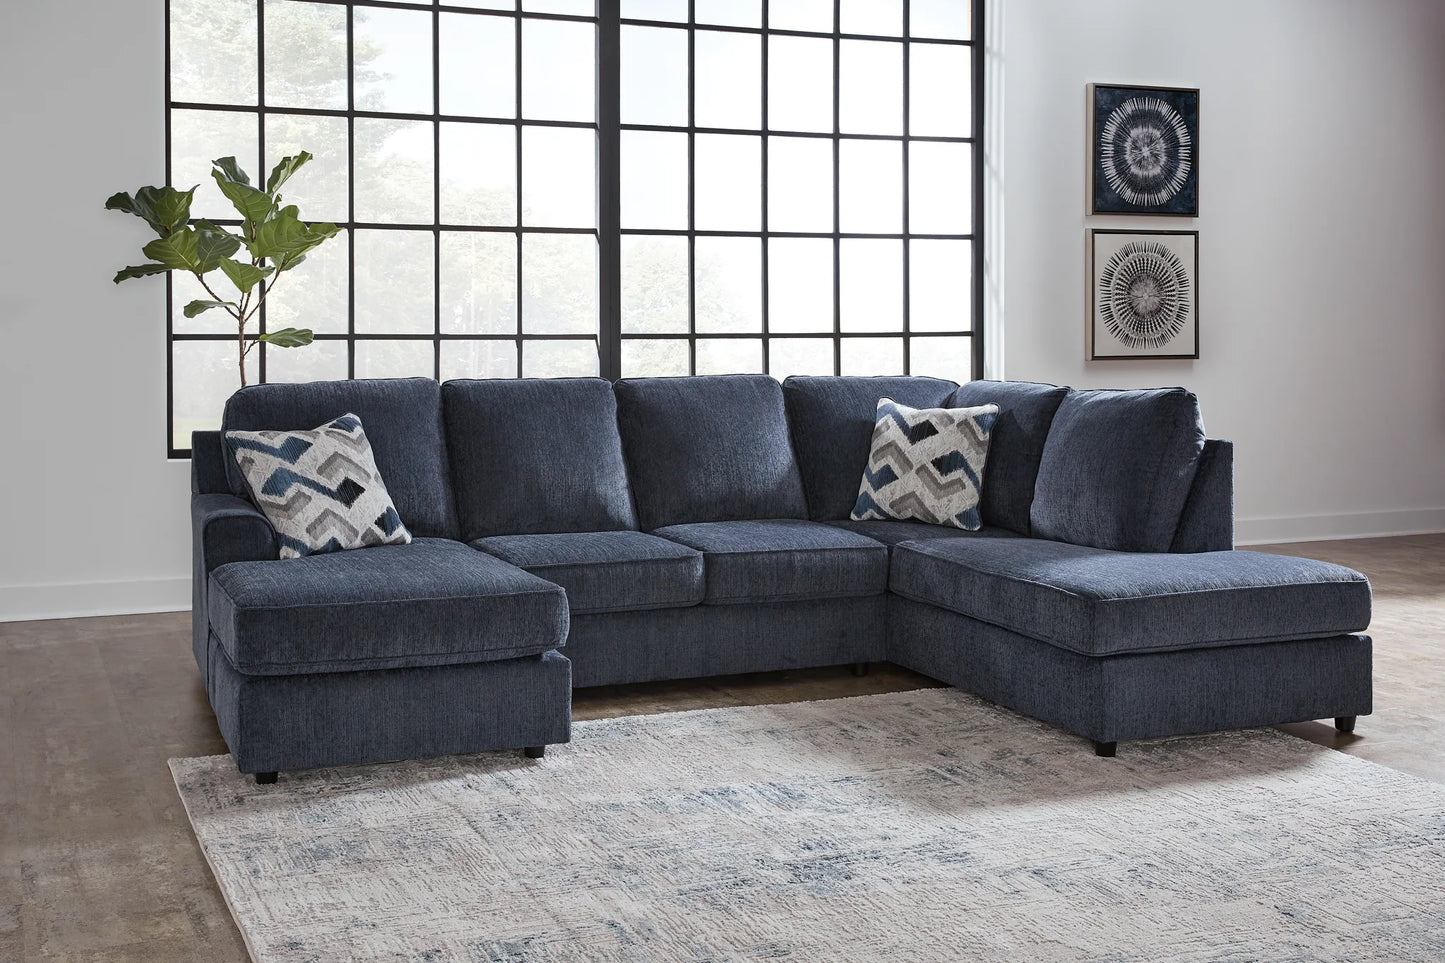 Albar Place - Cobalt - 2-Piece Sectional With Laf Sofa Chaise